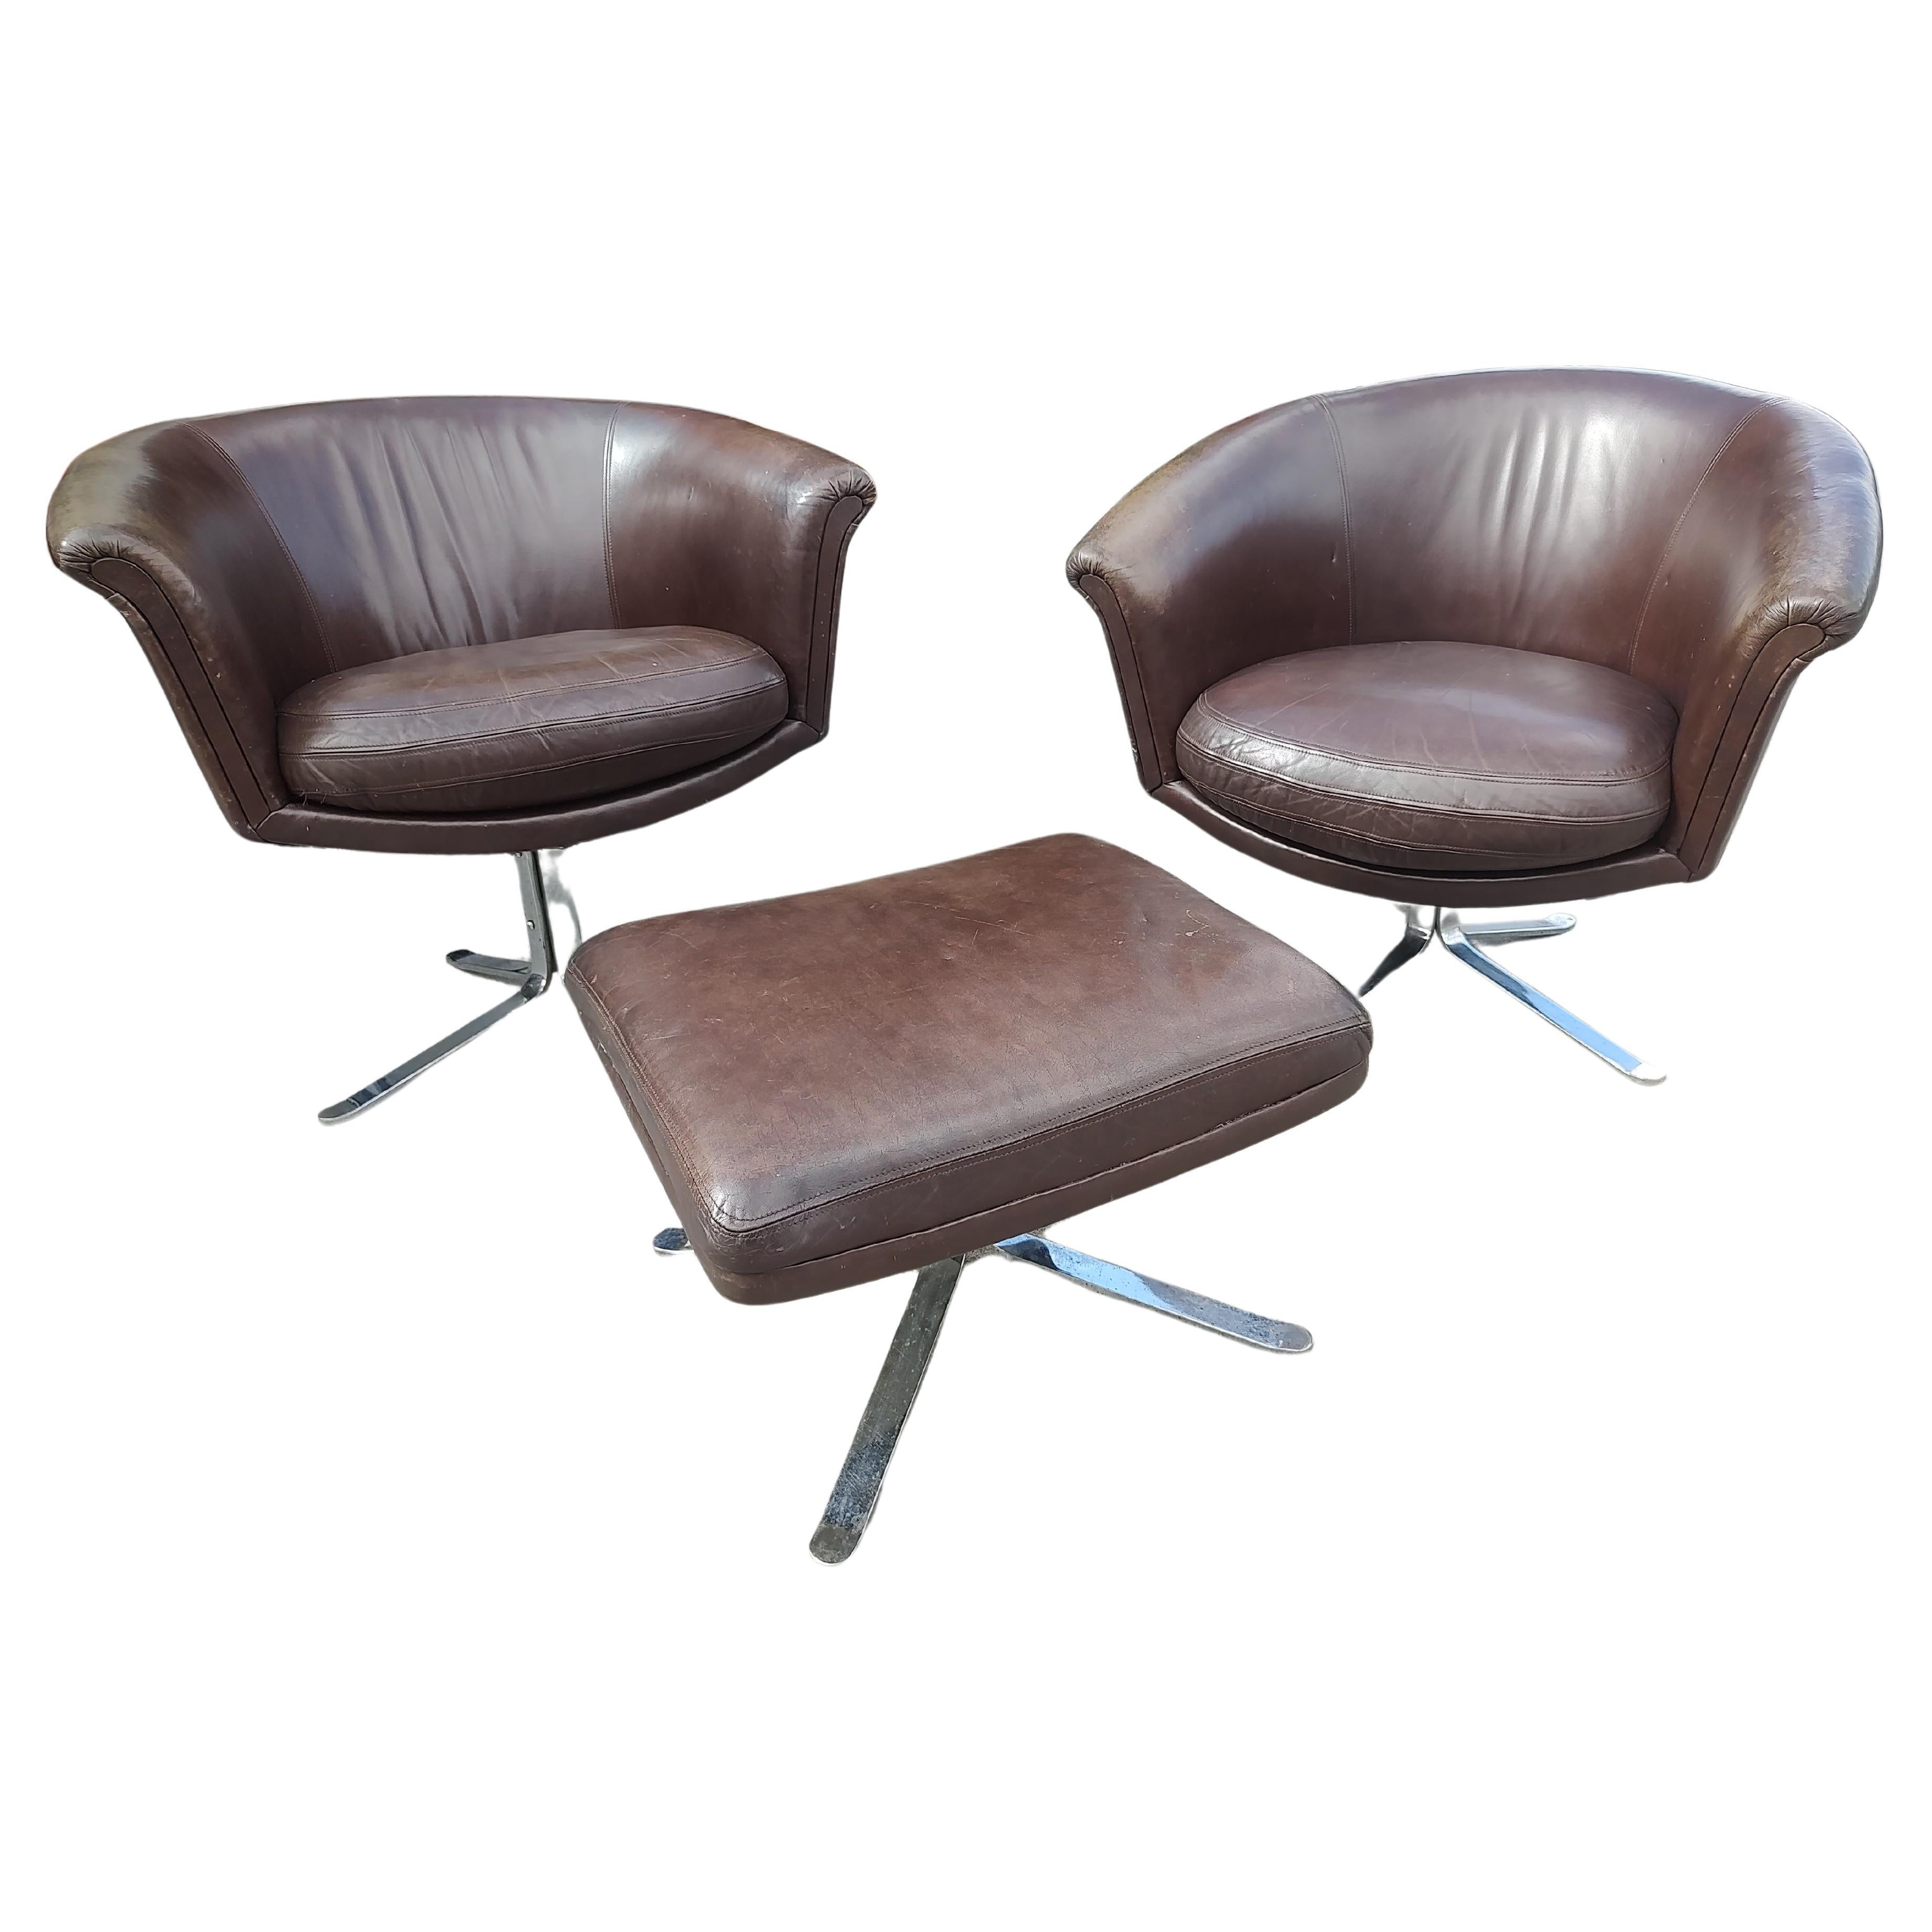 Mid-Century Modern Pair of Mid Century Modern Leather Swiveling Lounge Chairs with an Ottoman C1965 For Sale